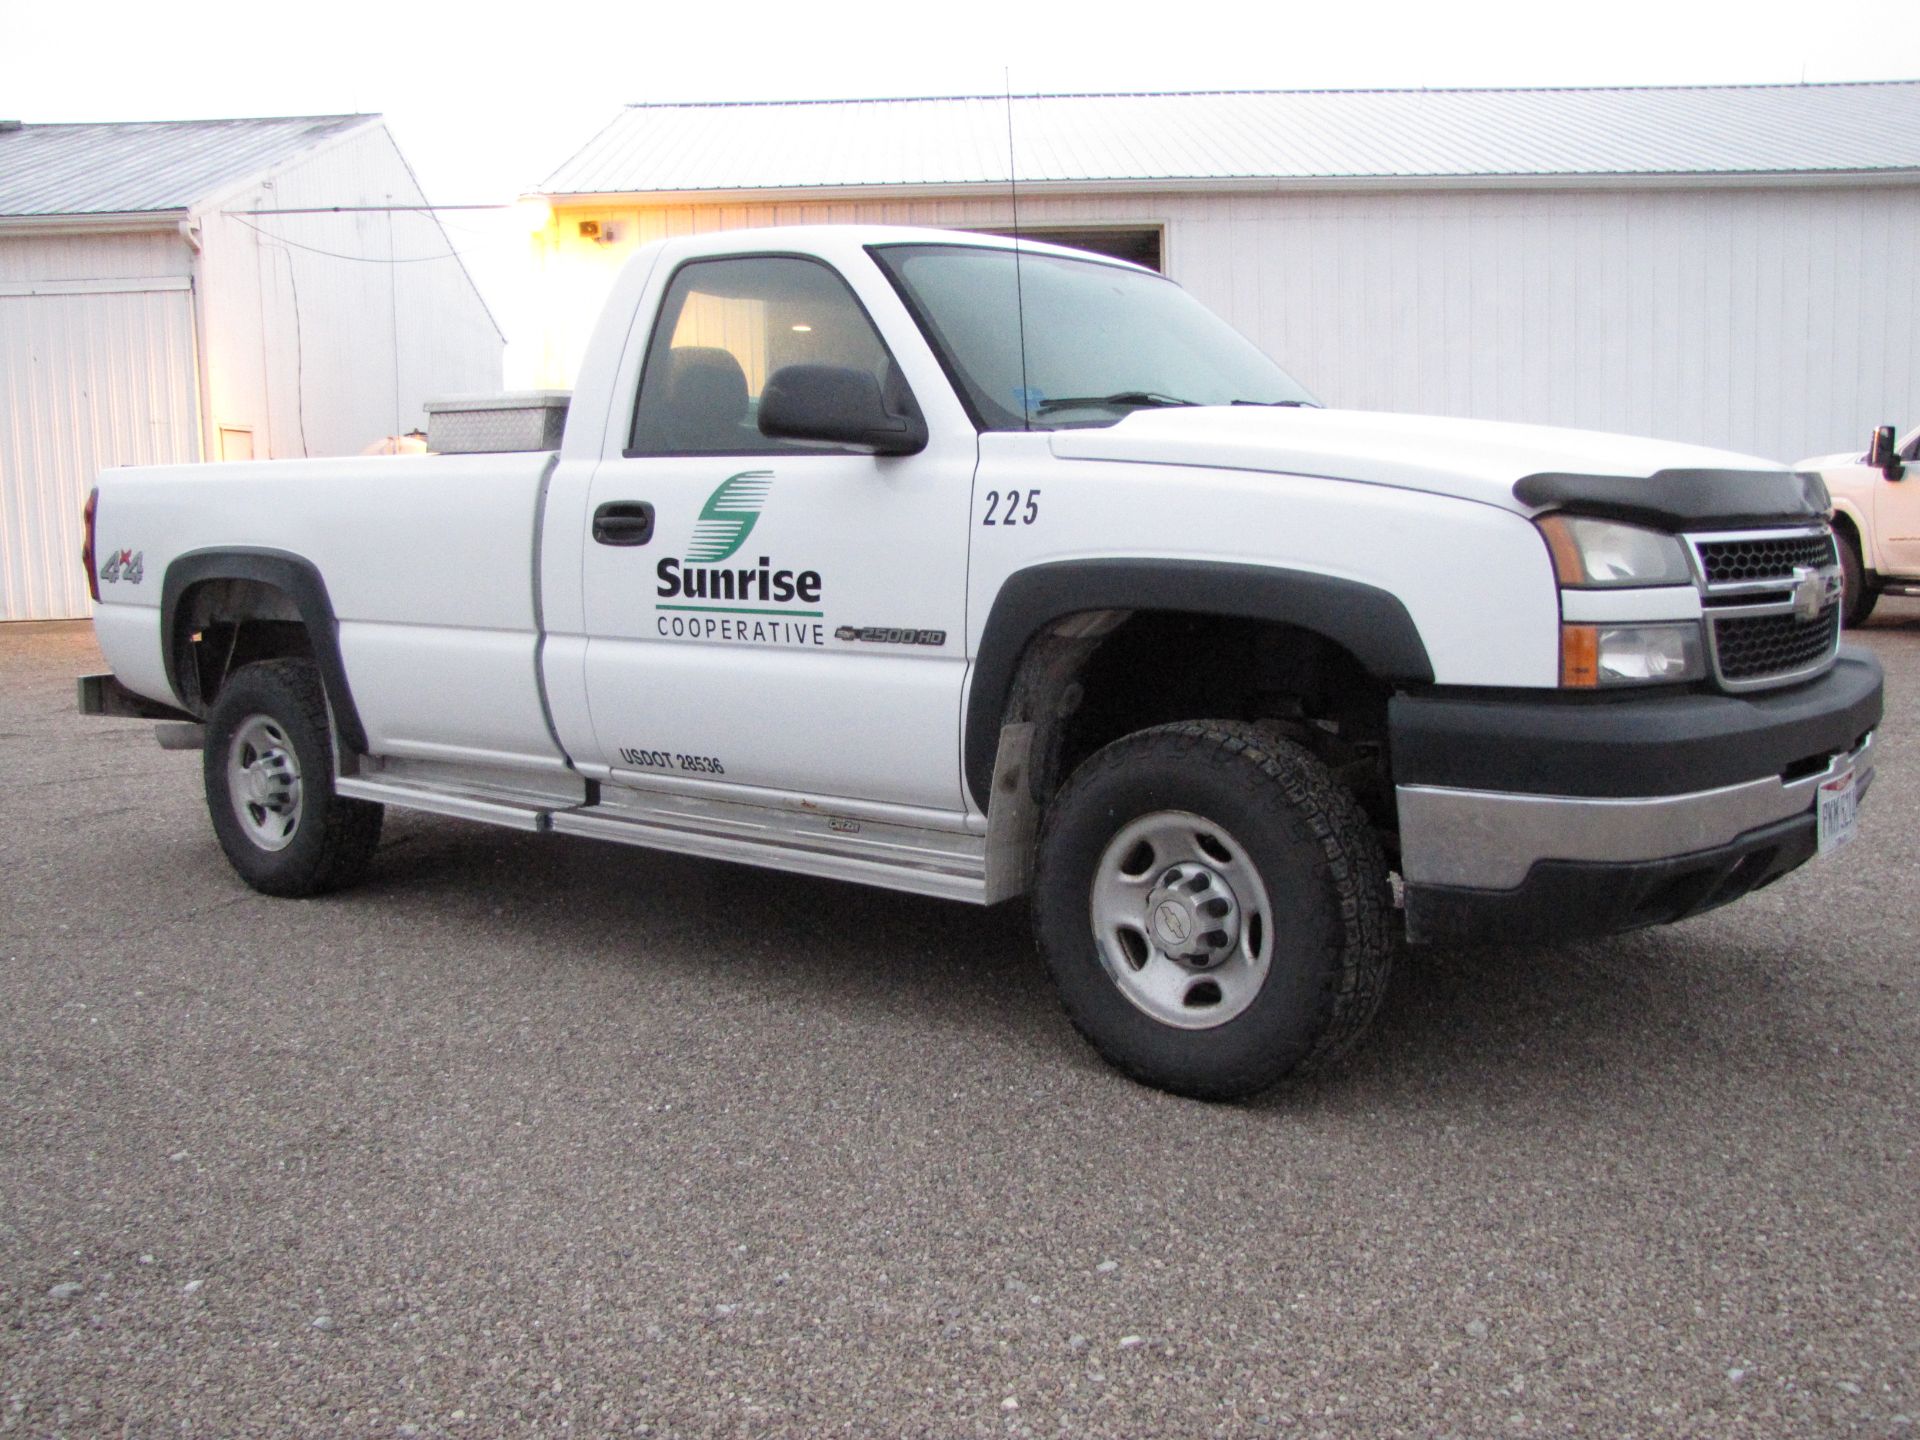 2006 Chevy 2500 HD pickup truck - Image 12 of 65